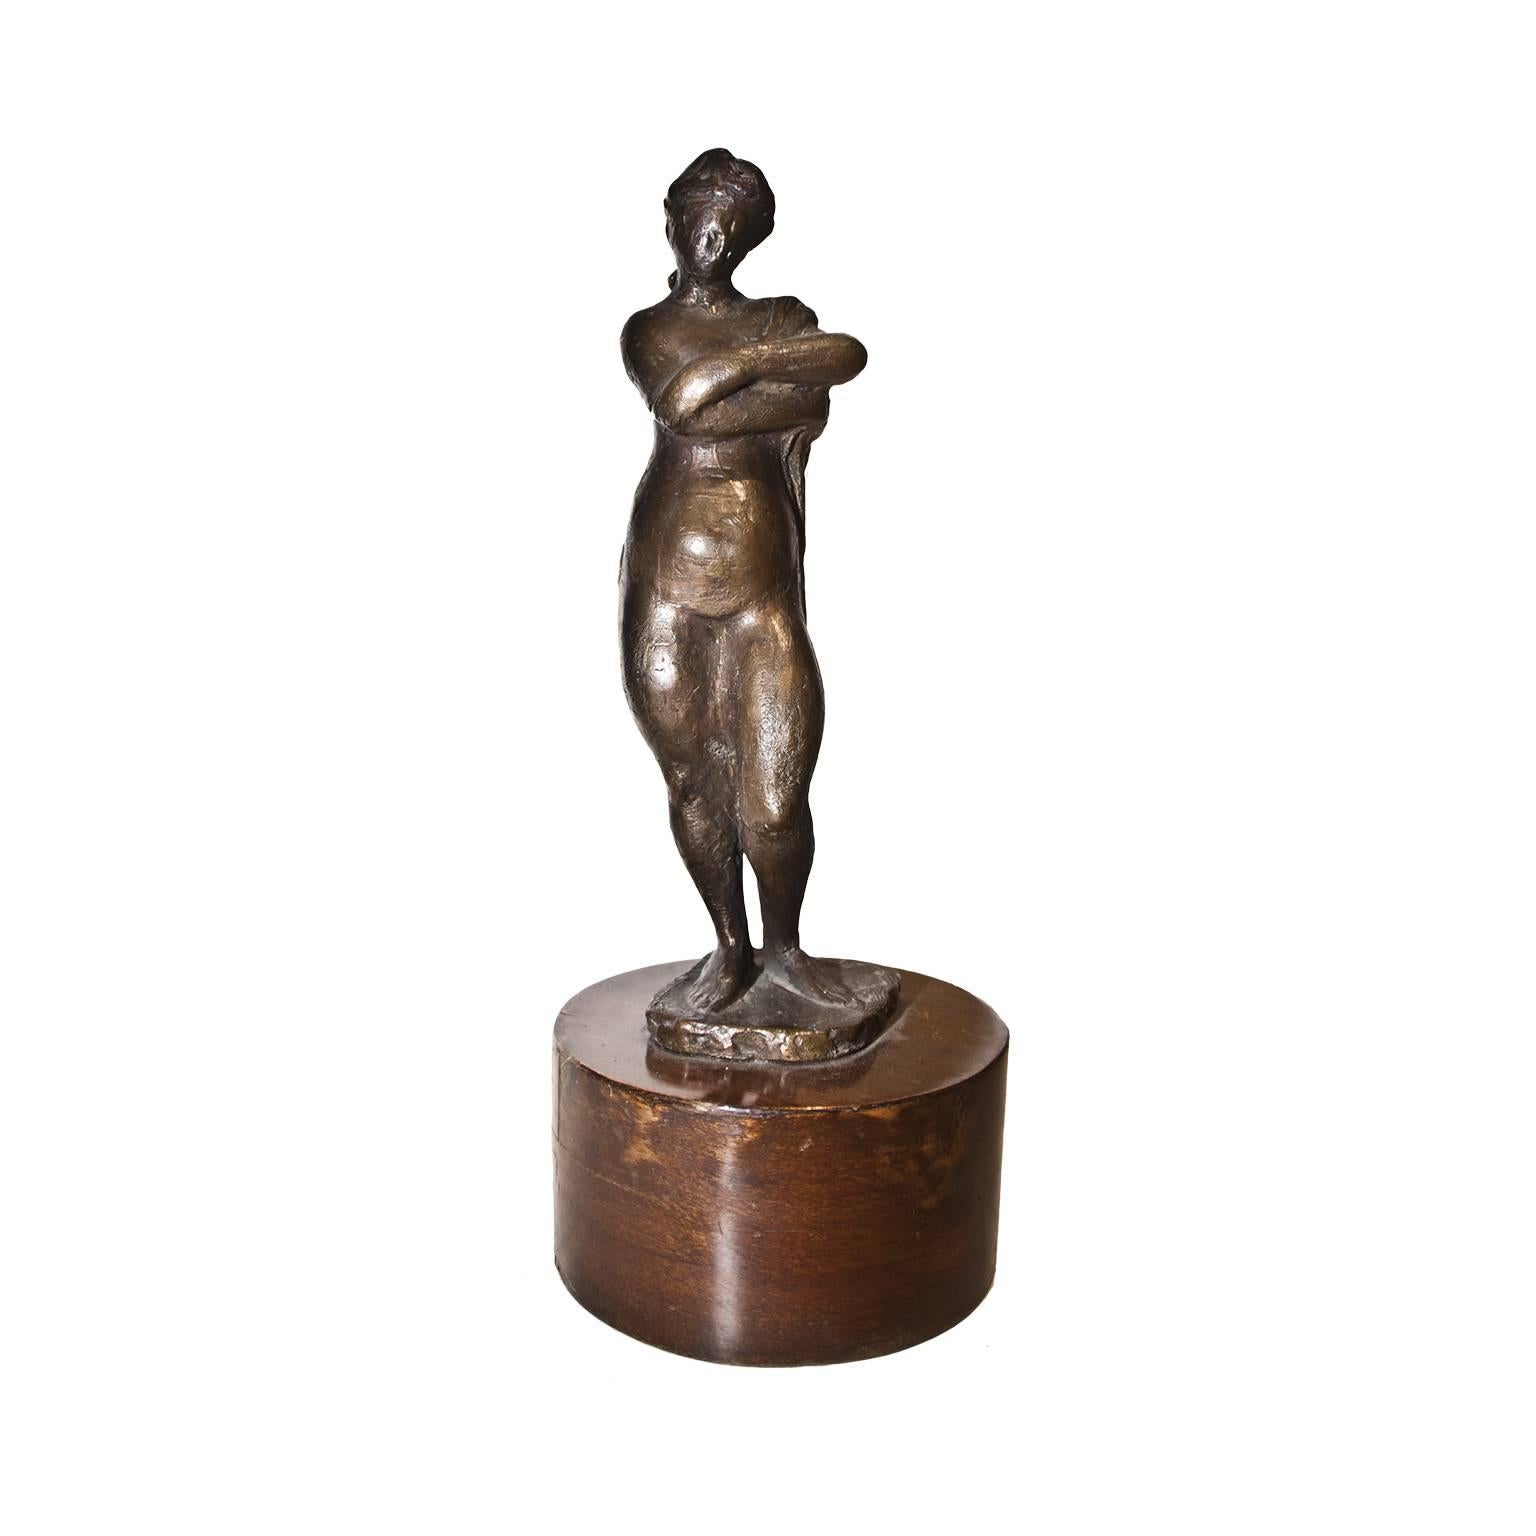 Figura femminile - nudo is a waxed bronze sculpture representing a woman with wooden base. Unique, signed and dated under the base “Mazzullo 44”. Certificate of authenticity signed by the artist. 

Giuseppe Mazzullo was an Italian artist and